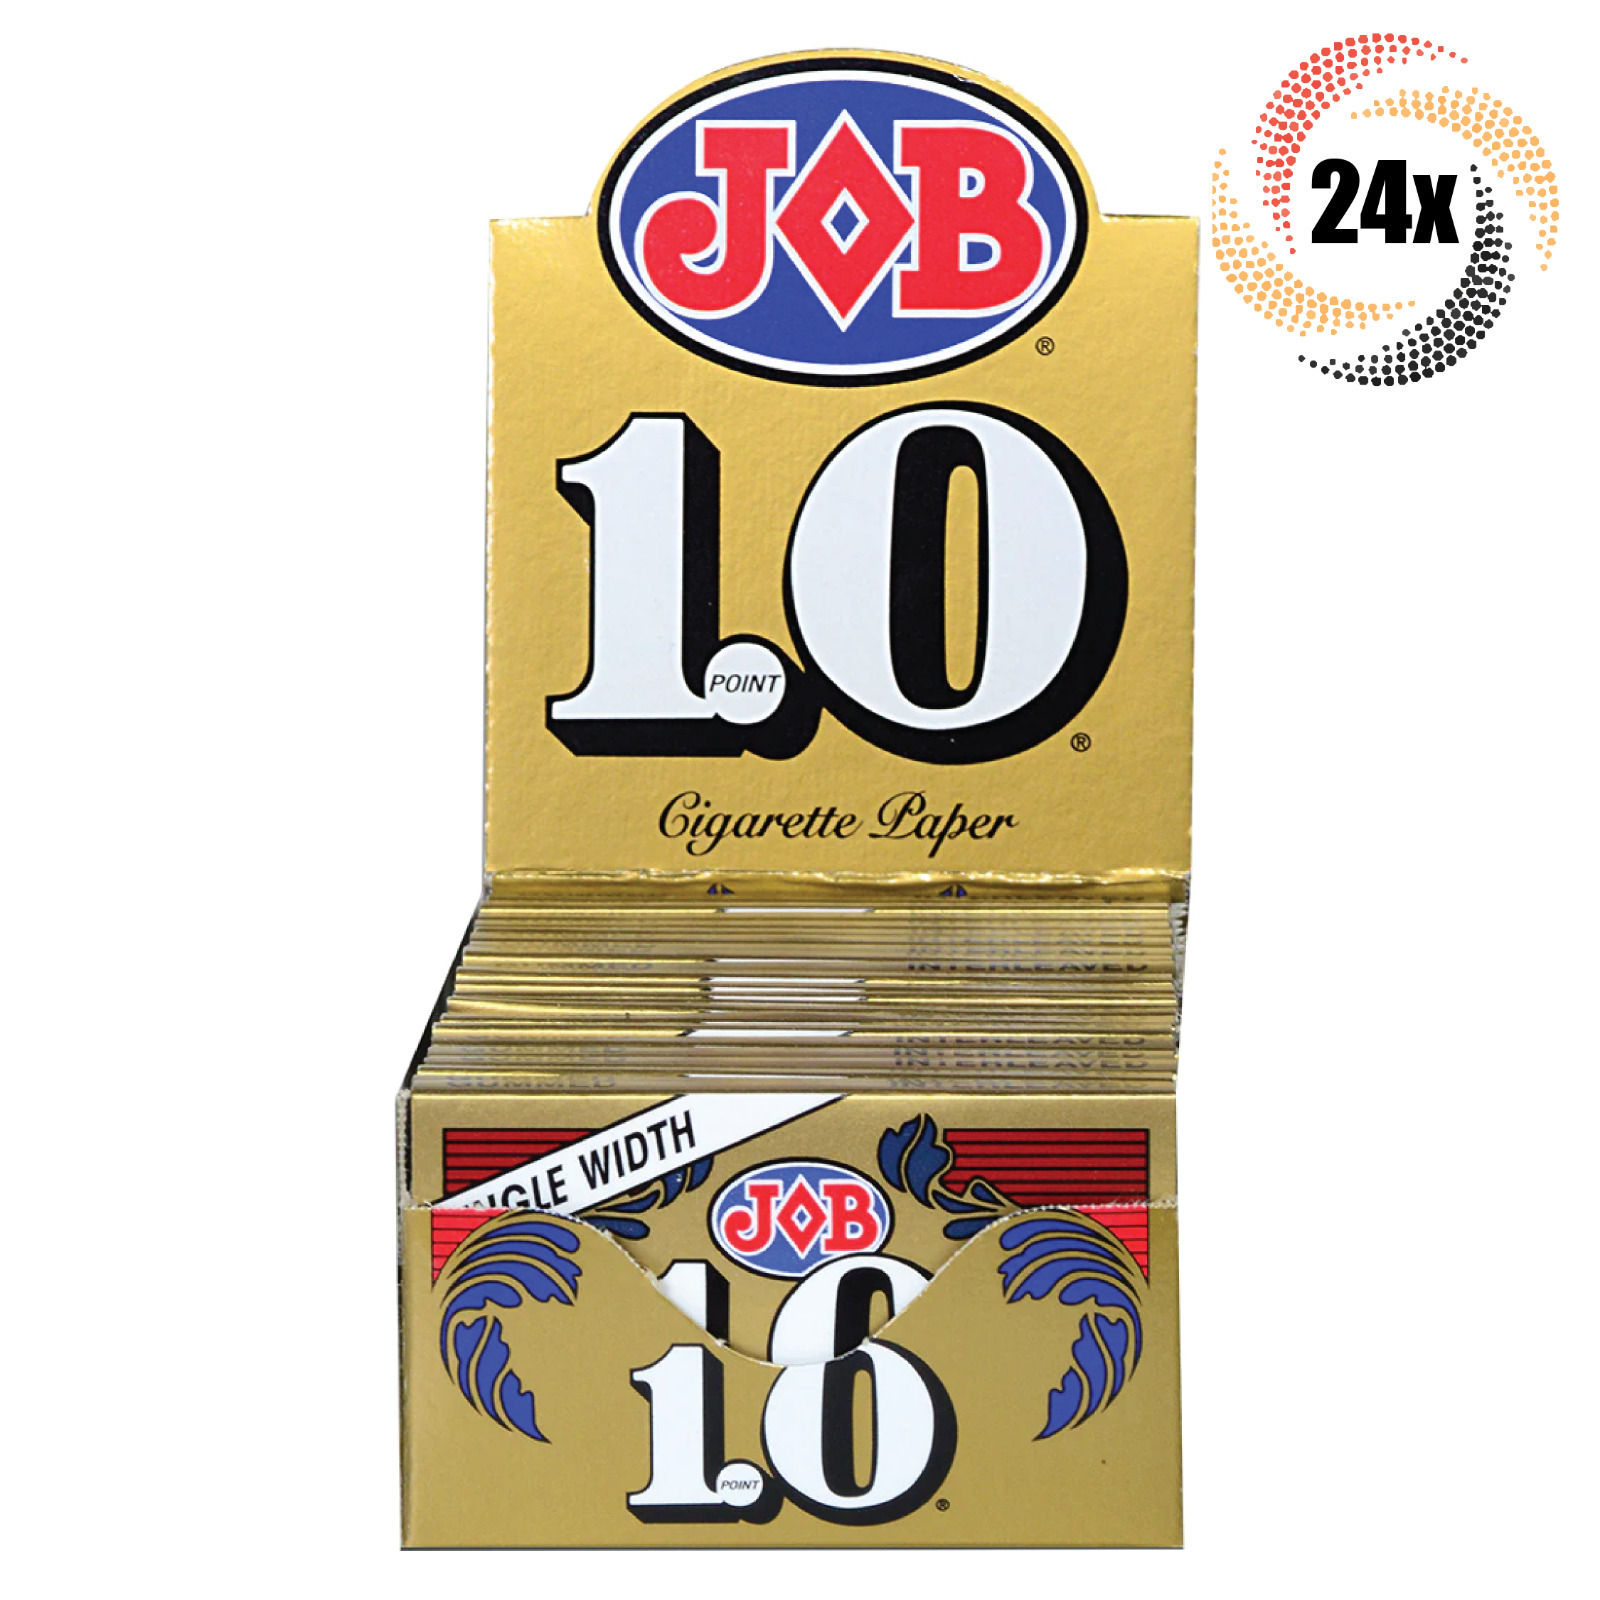 Full Box 24x Packs Job Gold Single Wide 1.0 | 32 Papers Each | + 2 Rolling Tubes